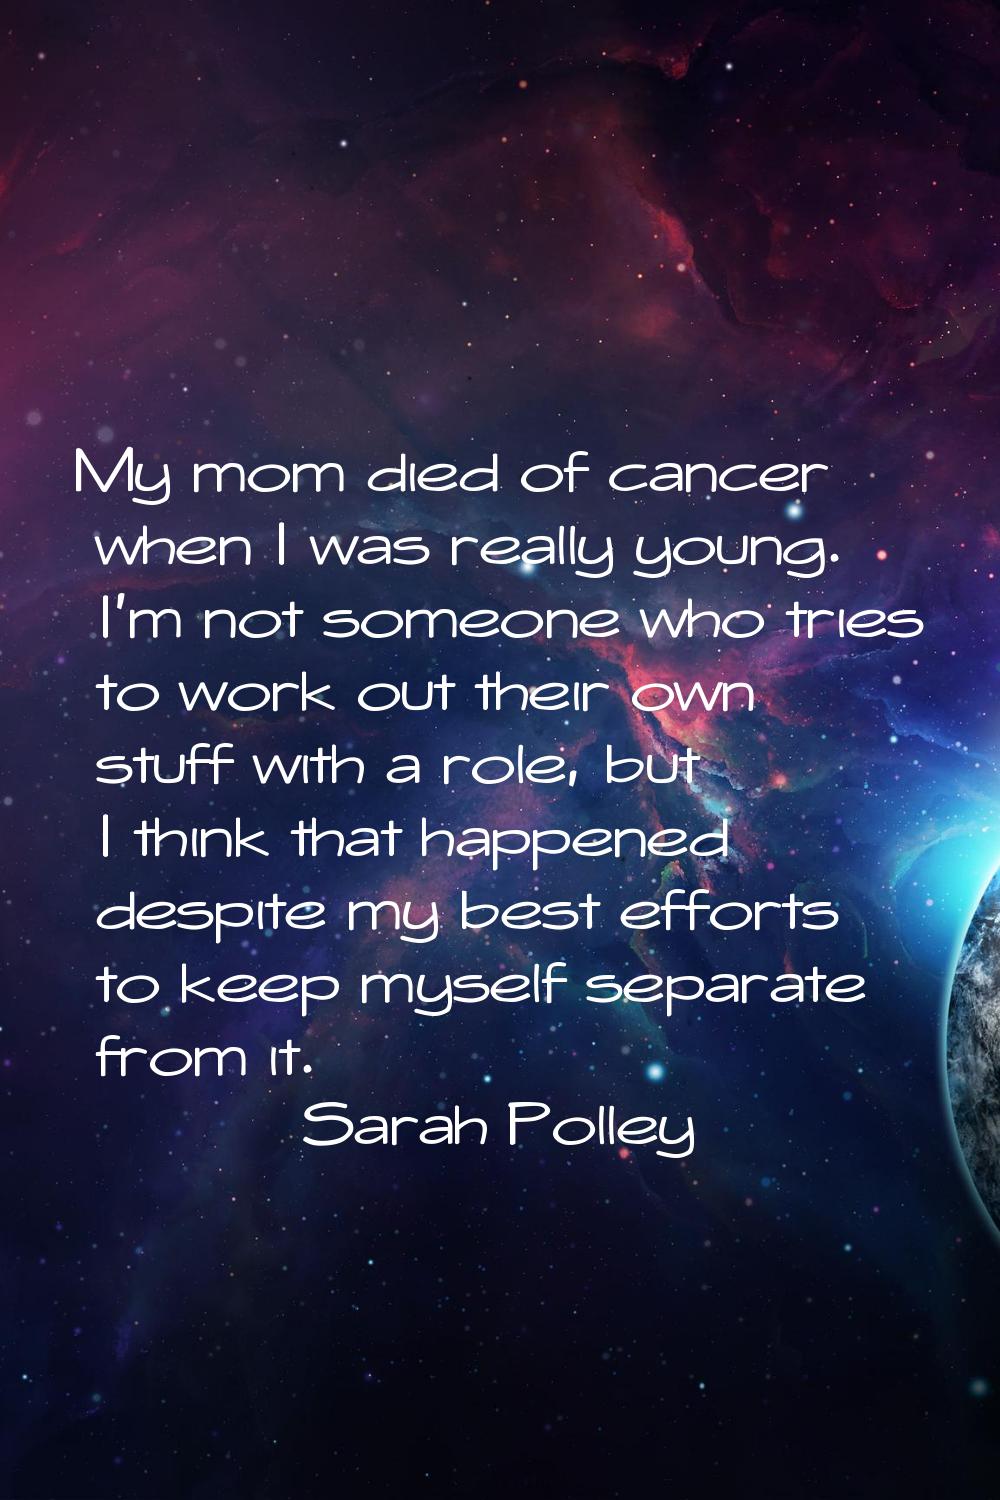 My mom died of cancer when I was really young. I'm not someone who tries to work out their own stuf